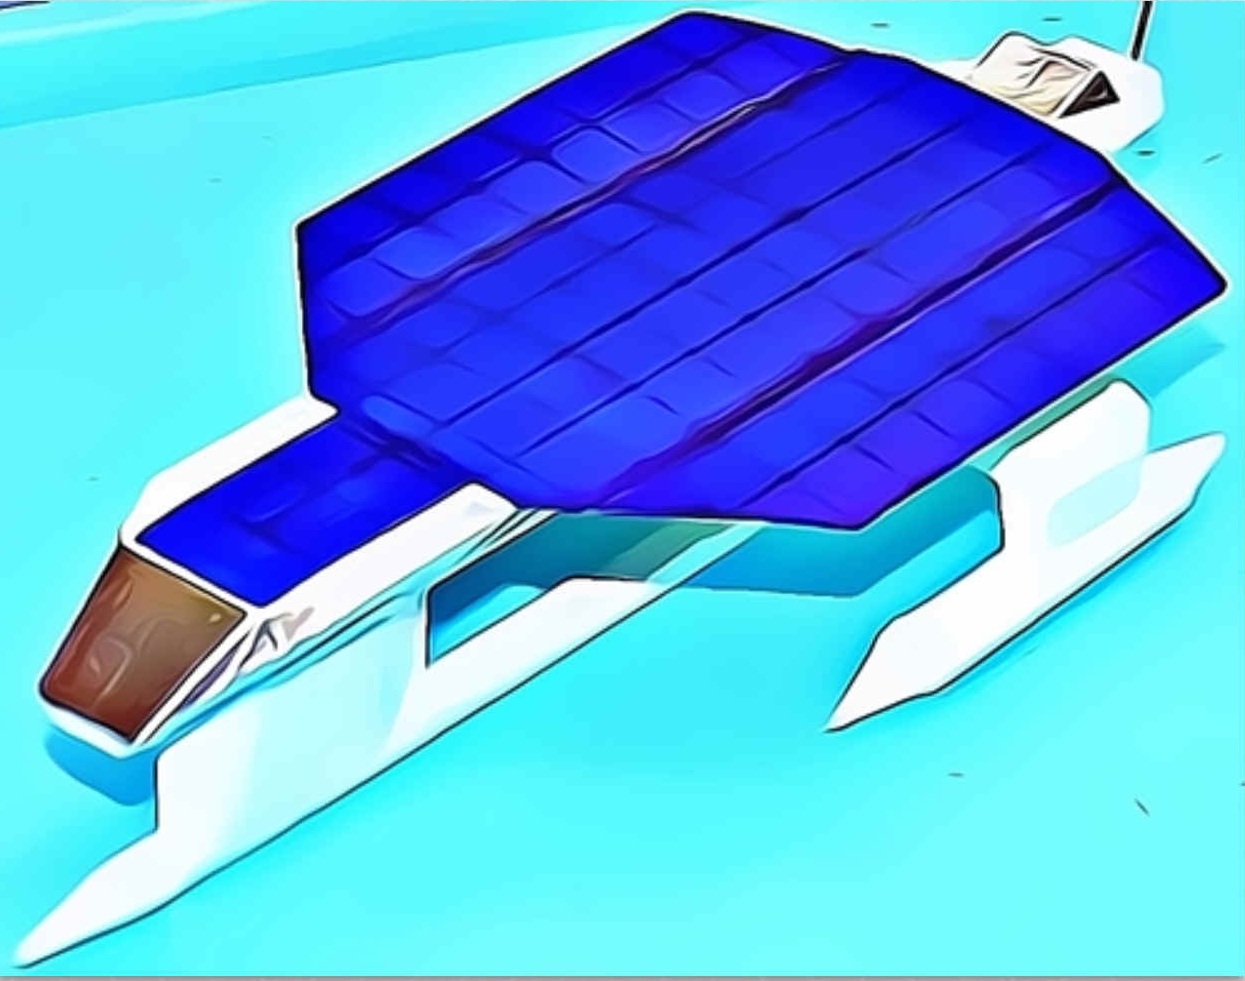 More than likely the world's fastest solar powered vessel